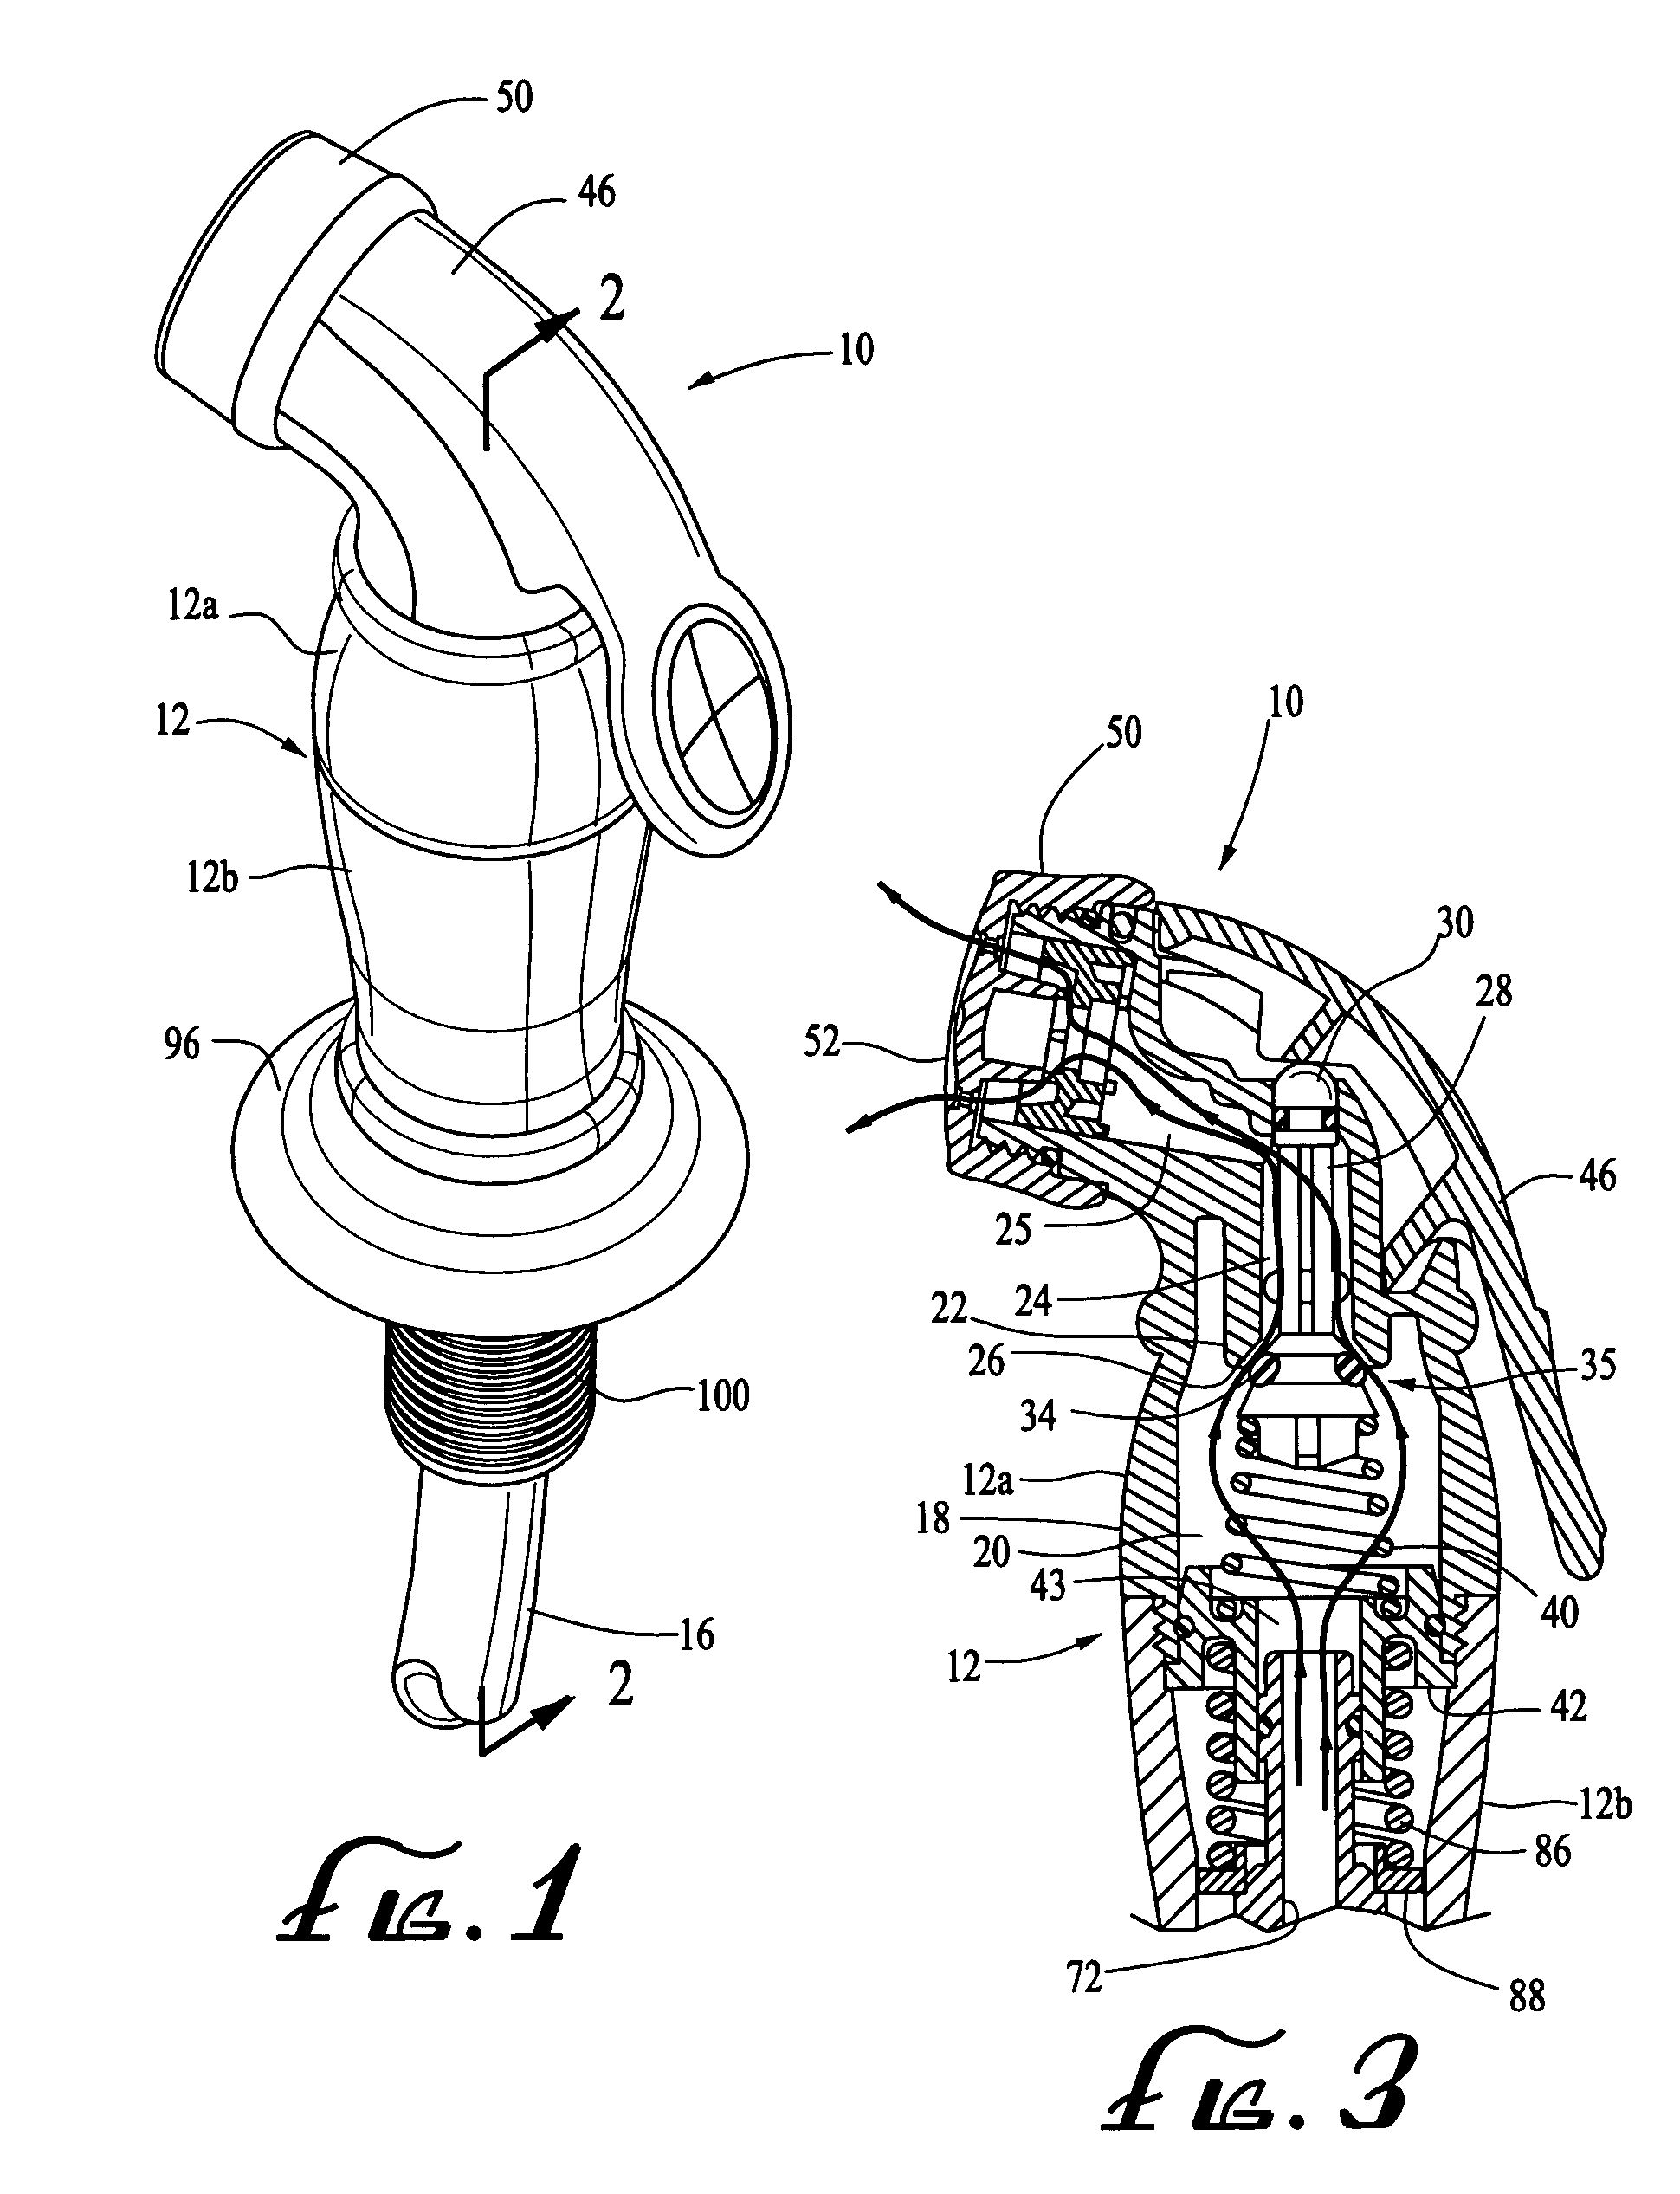 Handheld spraying device with quick disconnect assembly